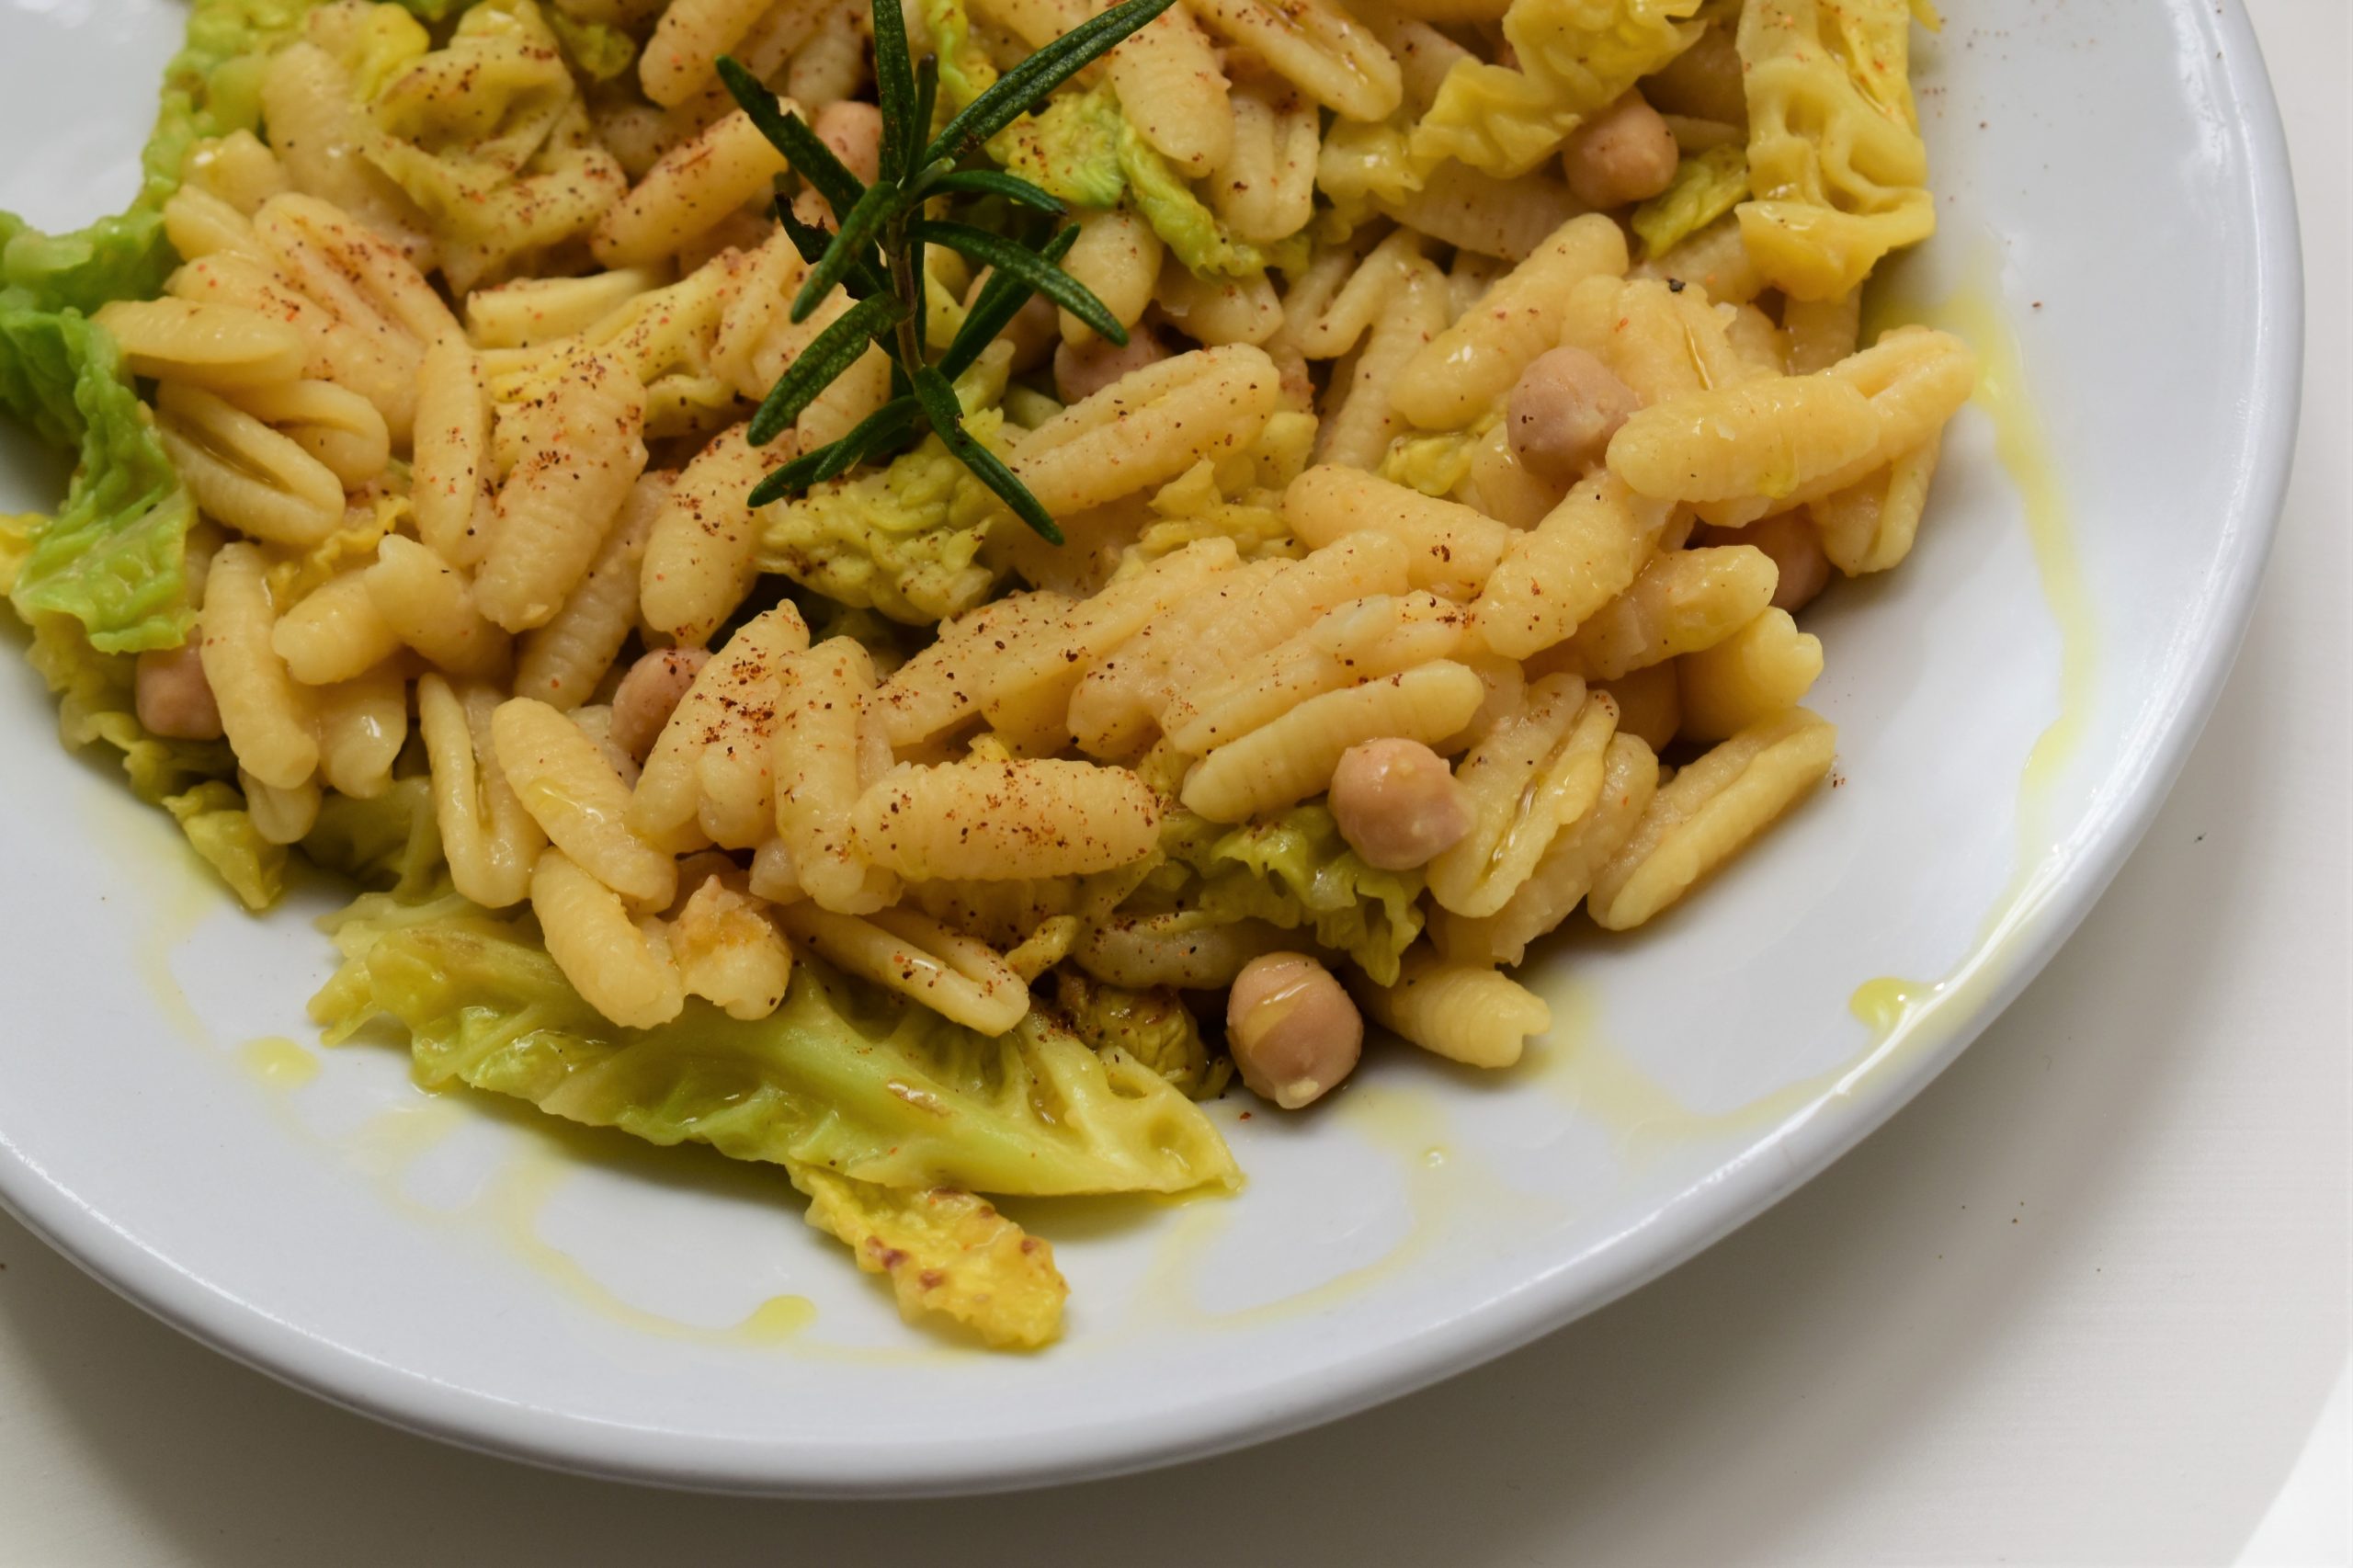 Sardinian gnocchi with savoy cabbage and chickpeas